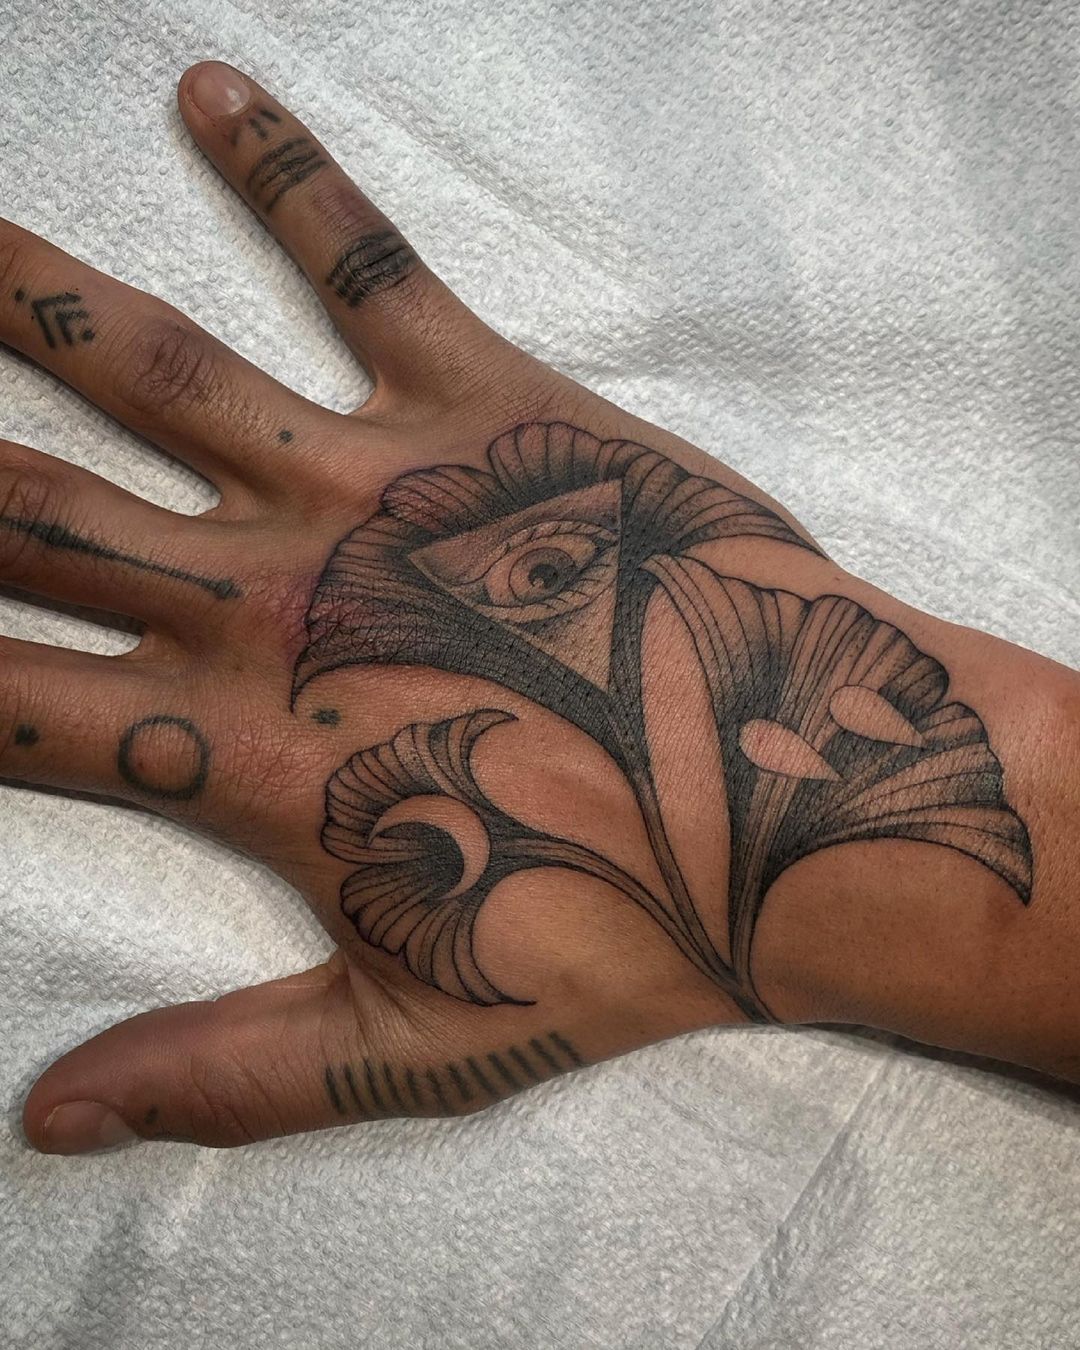 60+ Hand Tattoo Ideas for the Creative and Artistic - 100 Tattoos